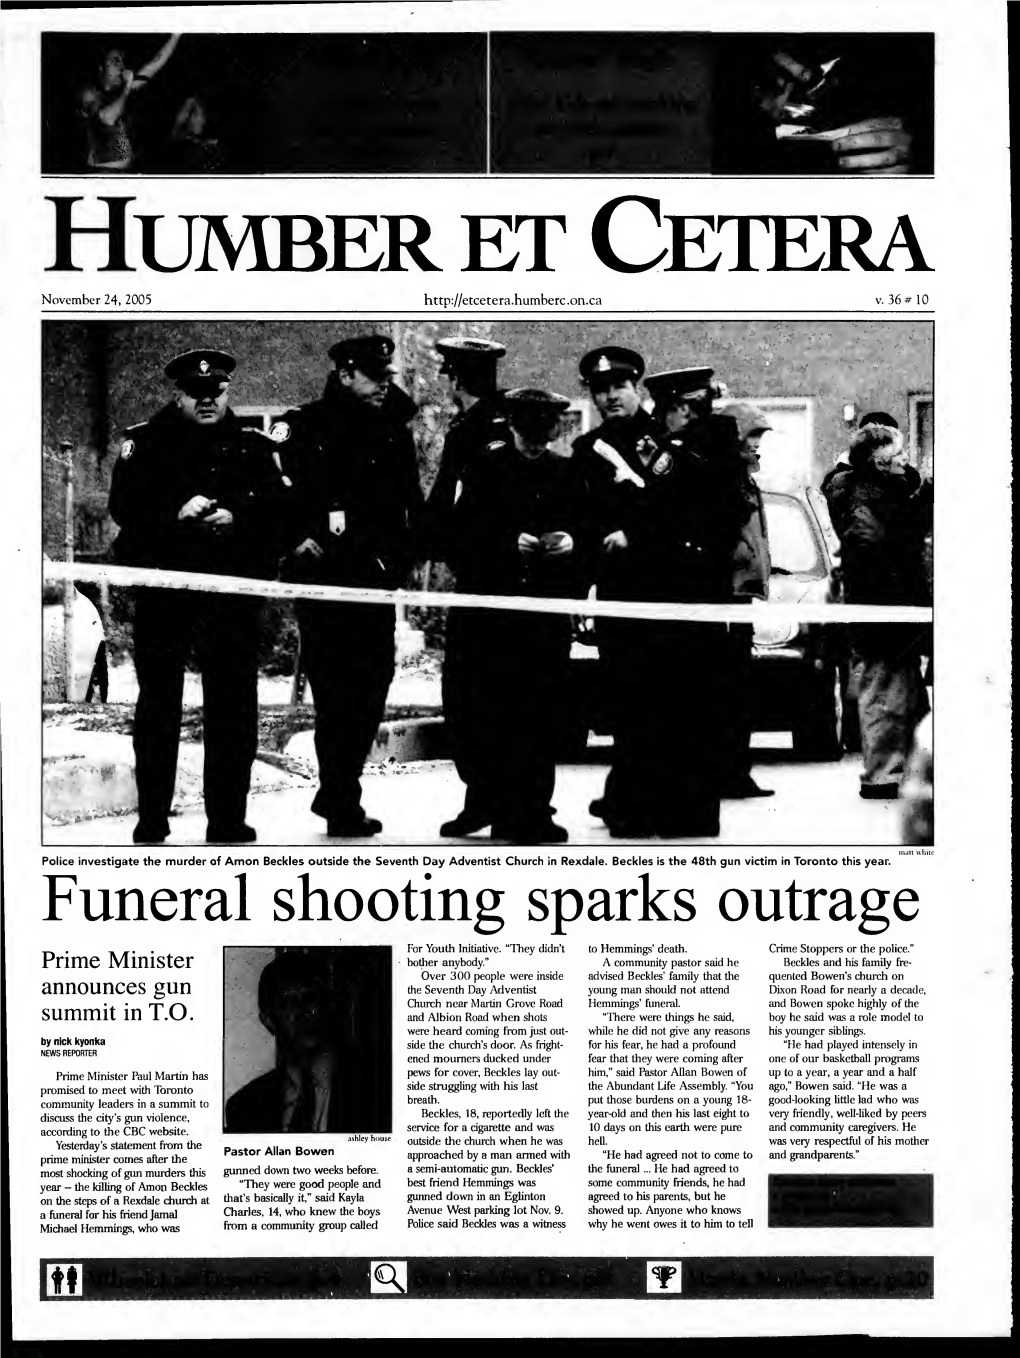 Funeral Shooting Sparks Outrage